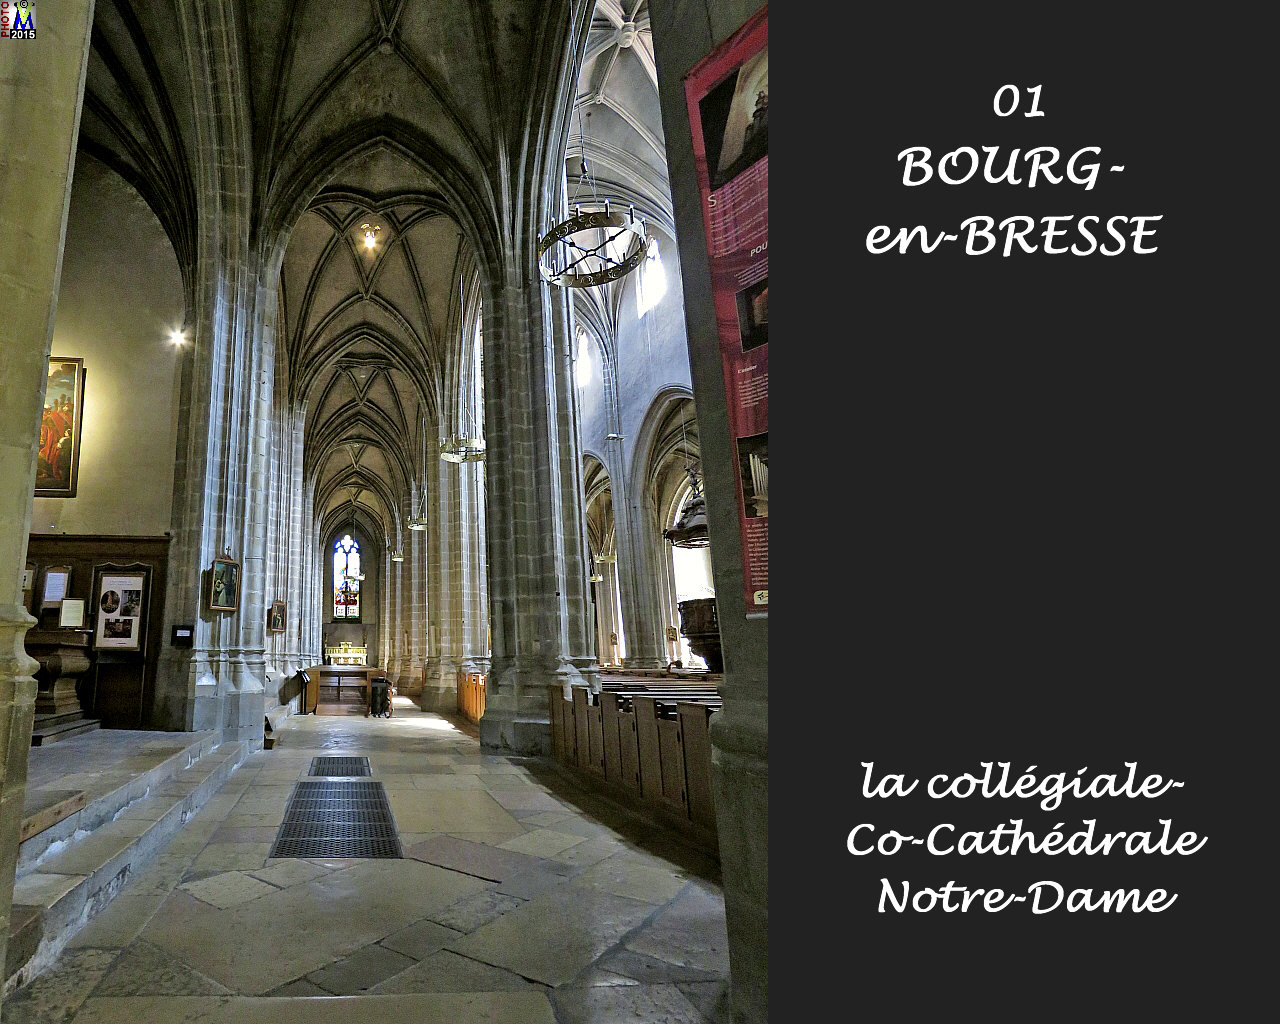 01BOURG-BRESSE_cathedrale_204.jpg